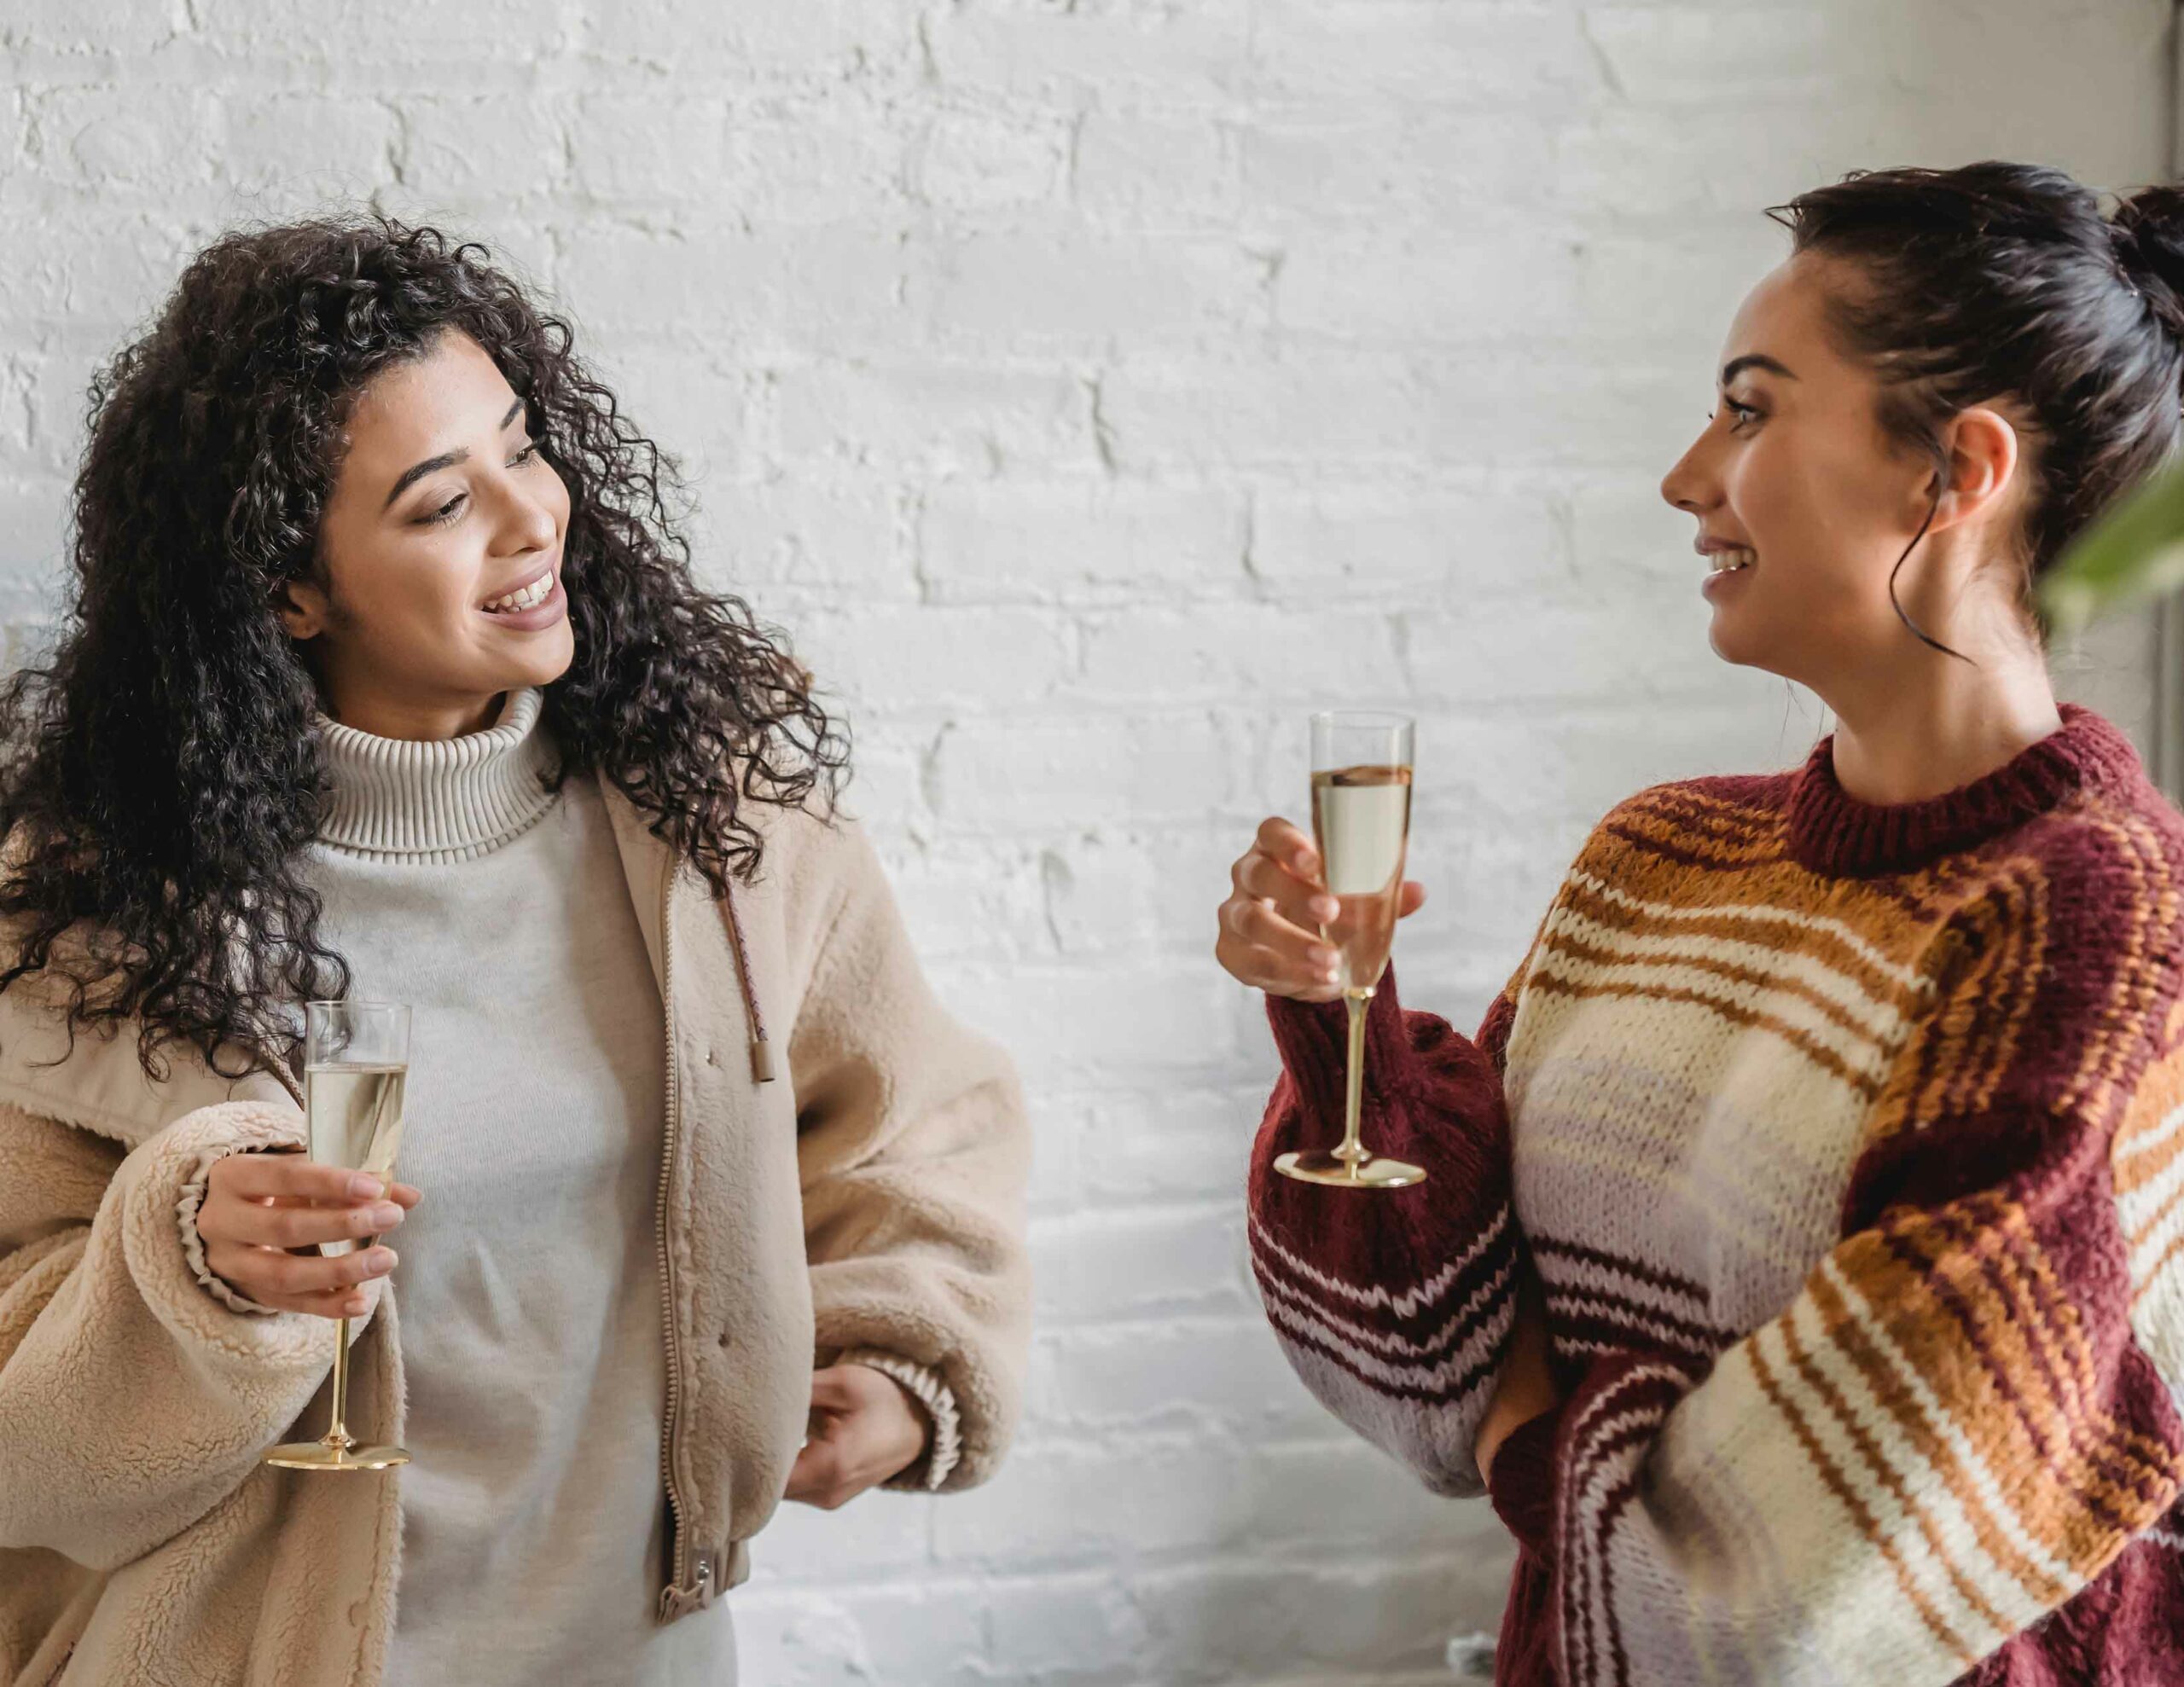 girl talking to each other holding a glass of champagne. Let EVERYONE know your plans